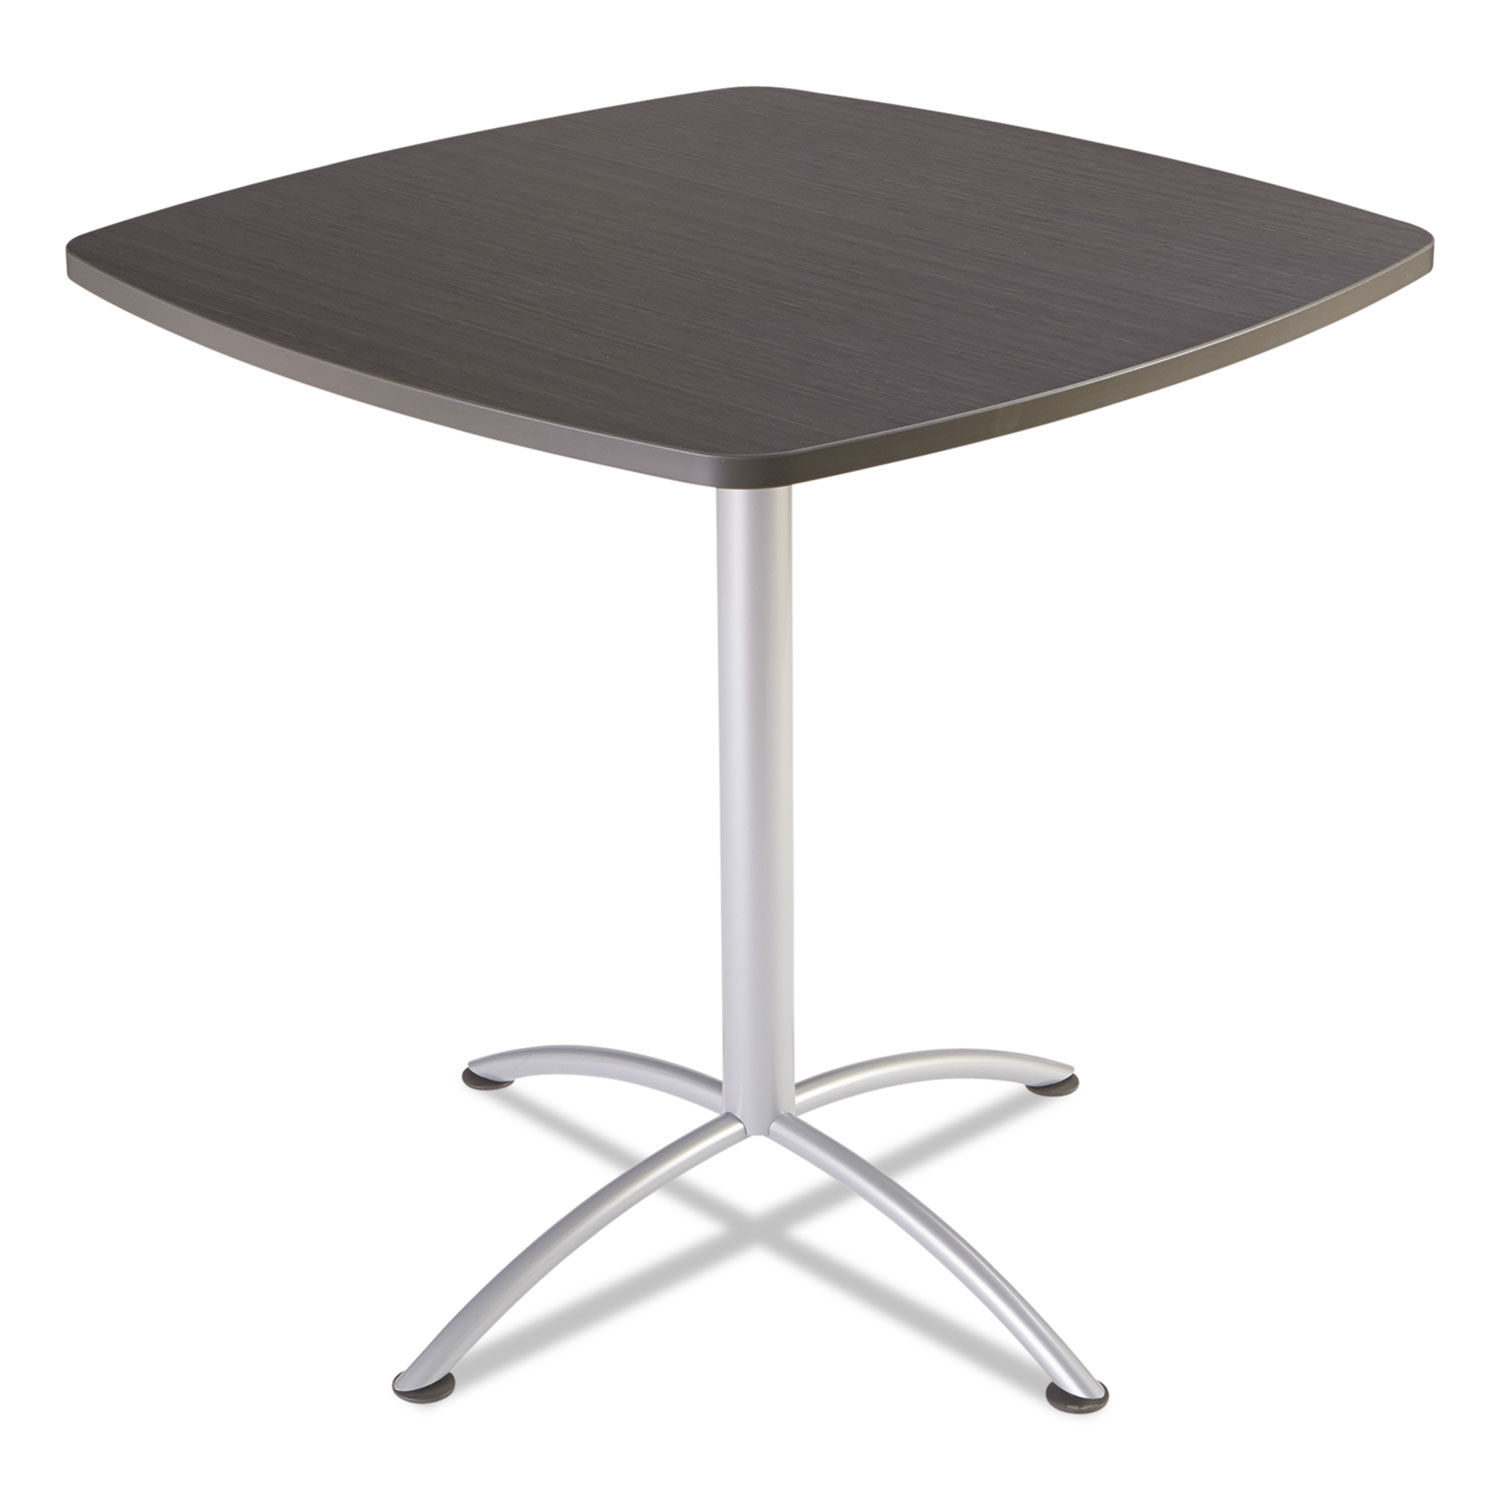 iLand Table Bistro-Height, Square Top, Contoured Edges, 42w x 42d x 42h, Gray Walnut/Silver